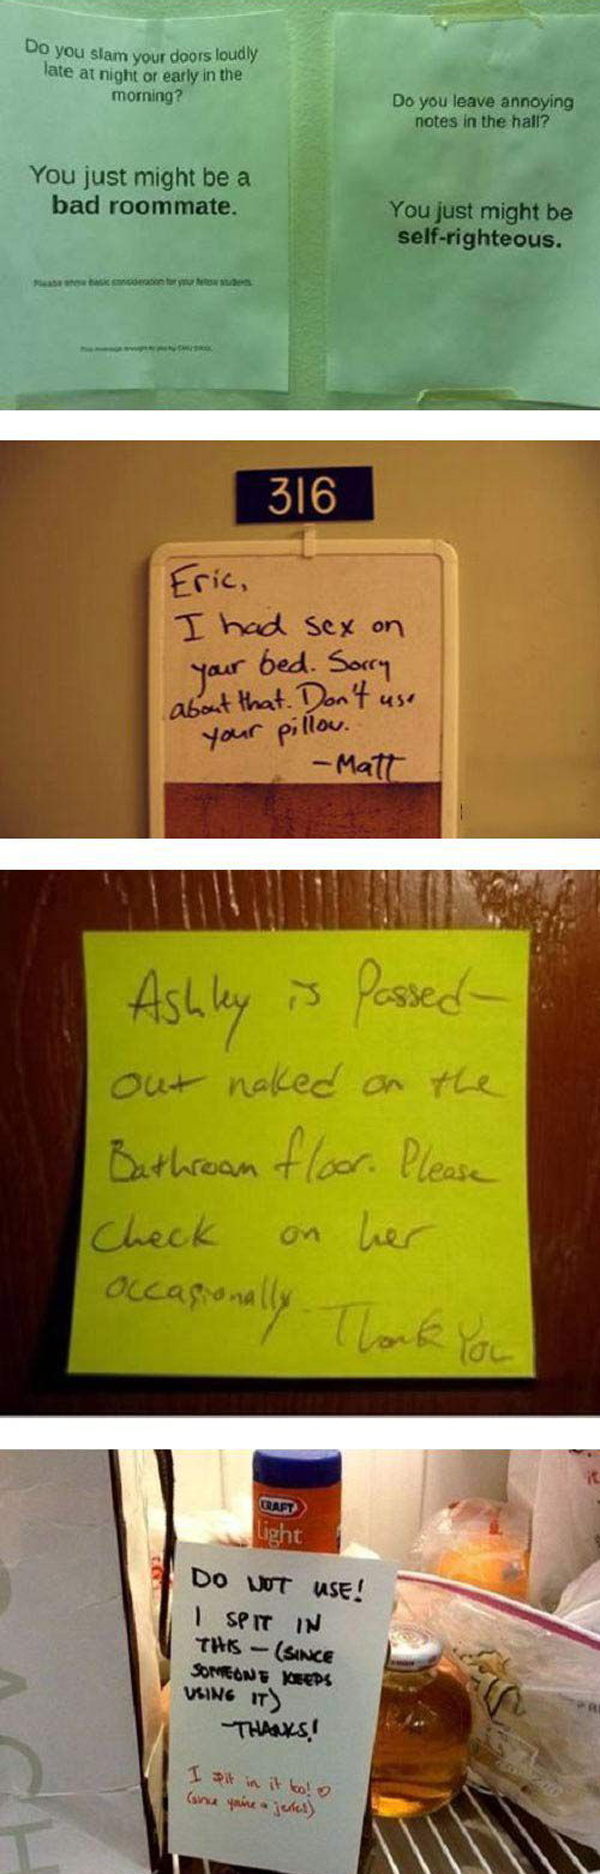 funny roommmate note